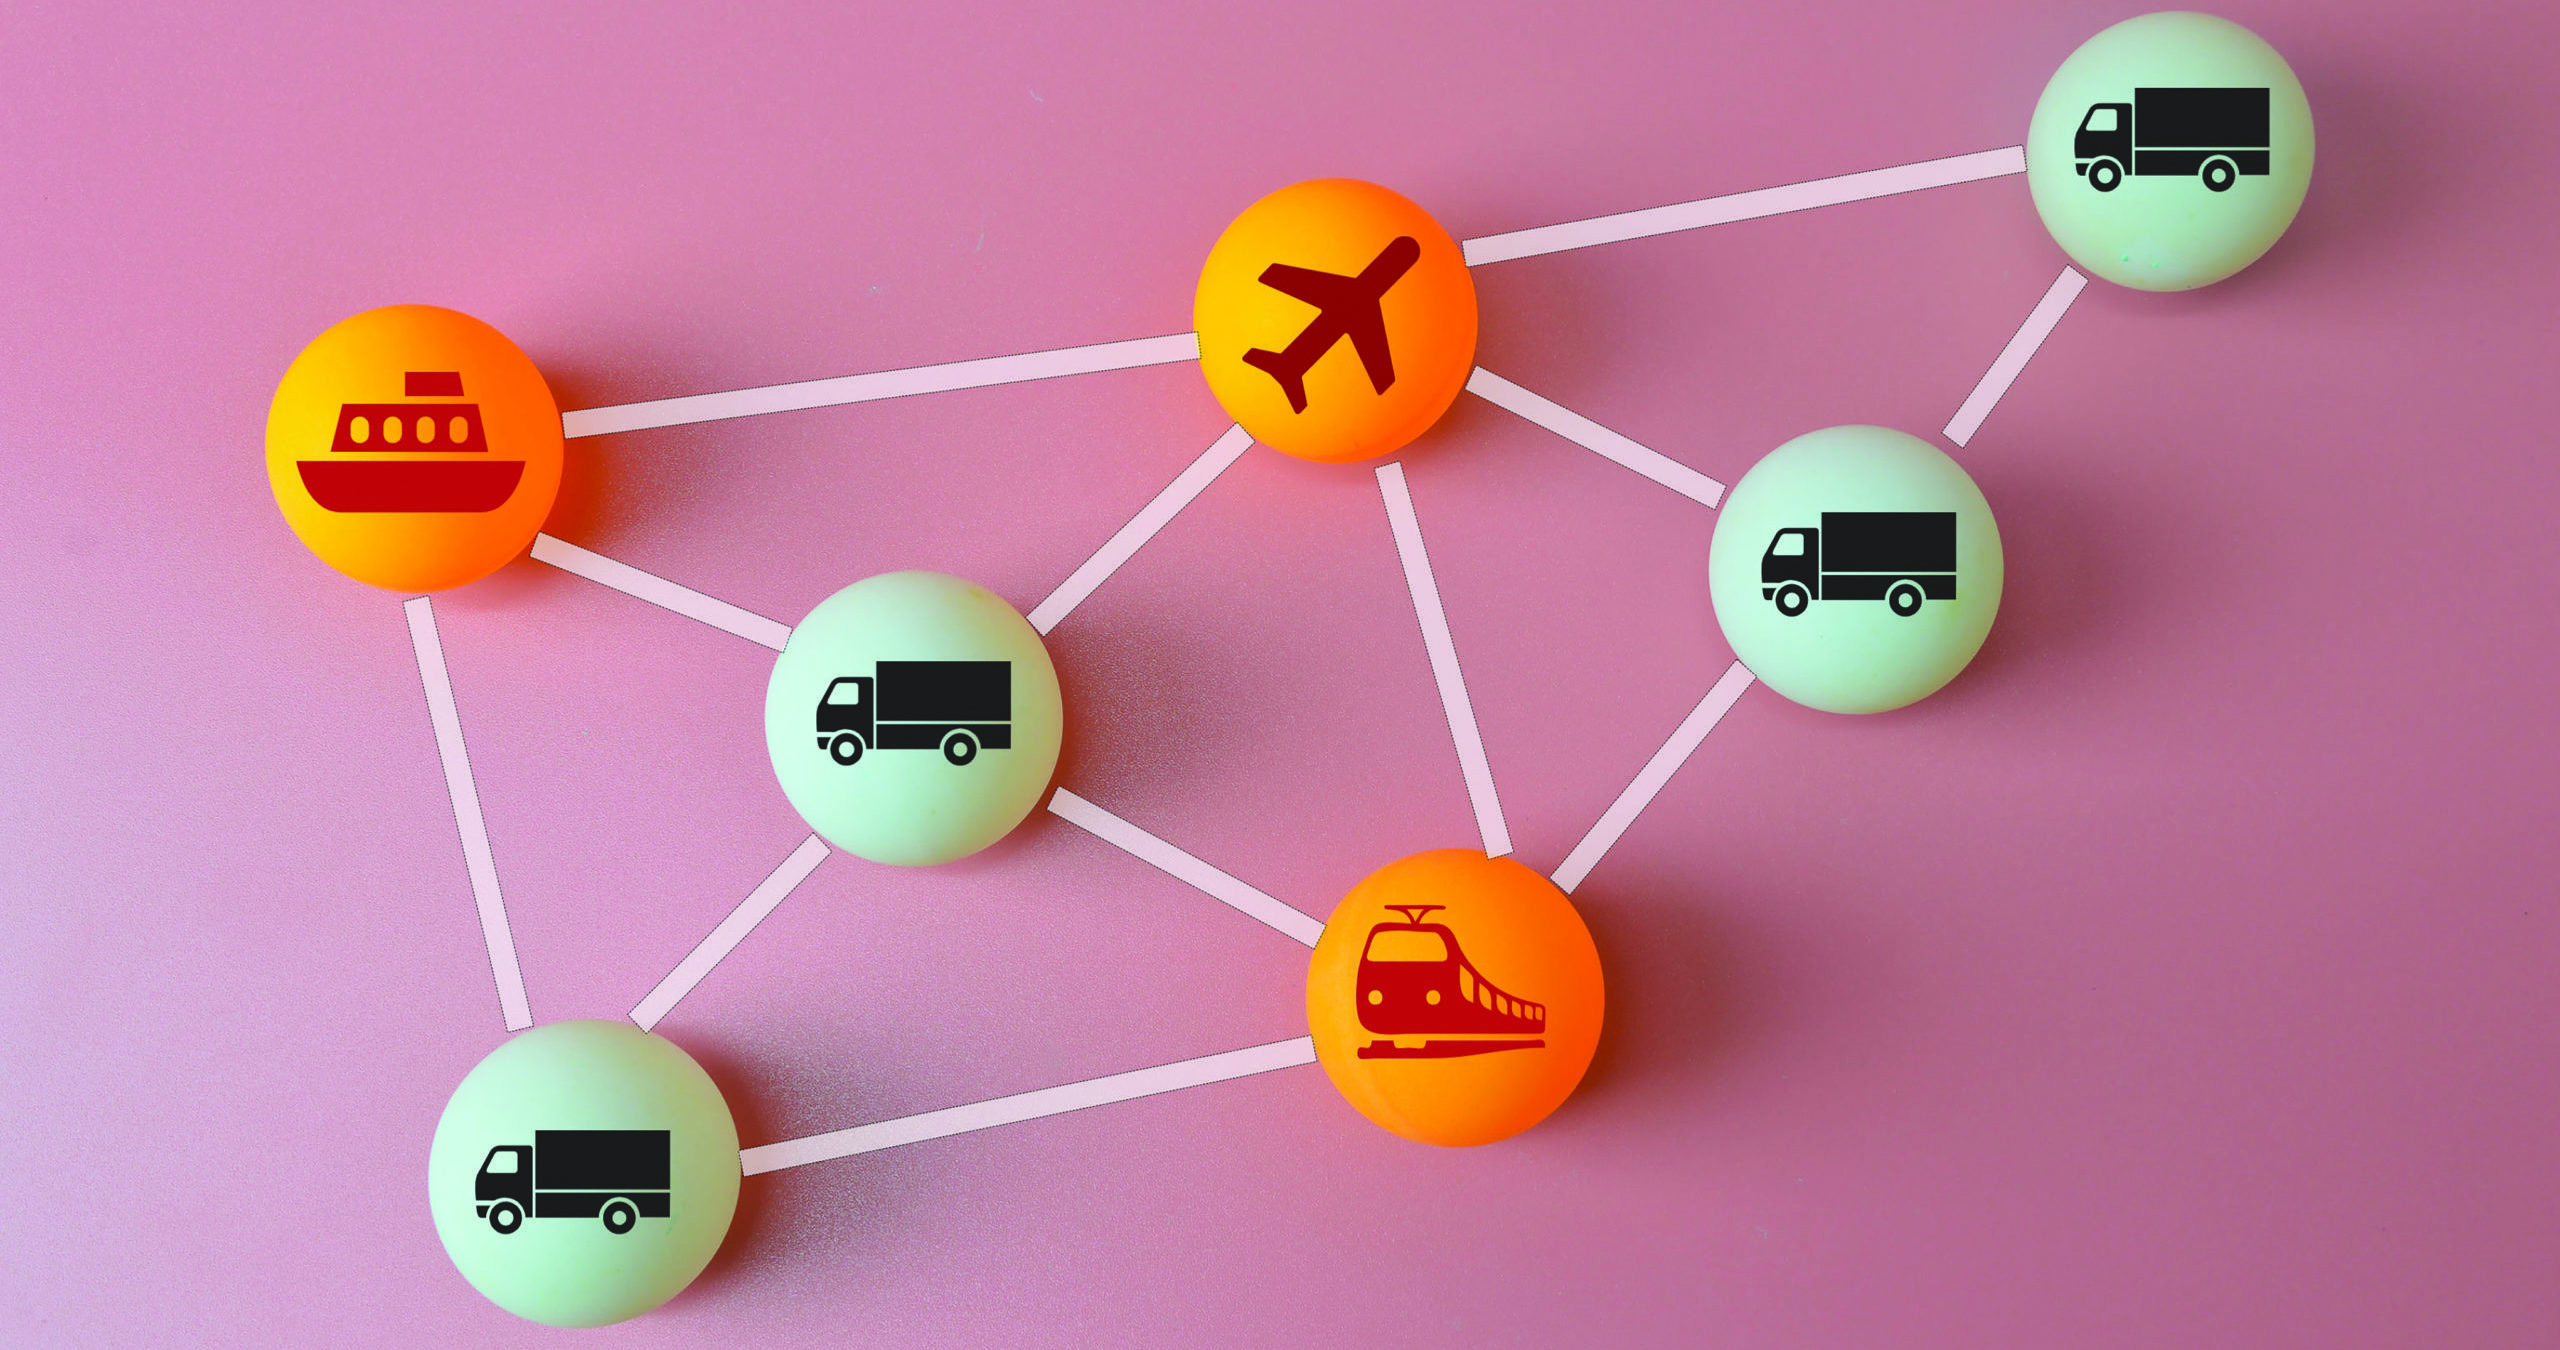 Supply Chain connection graphic showing planes, trains, and boats connected highlighting supply chain issues 